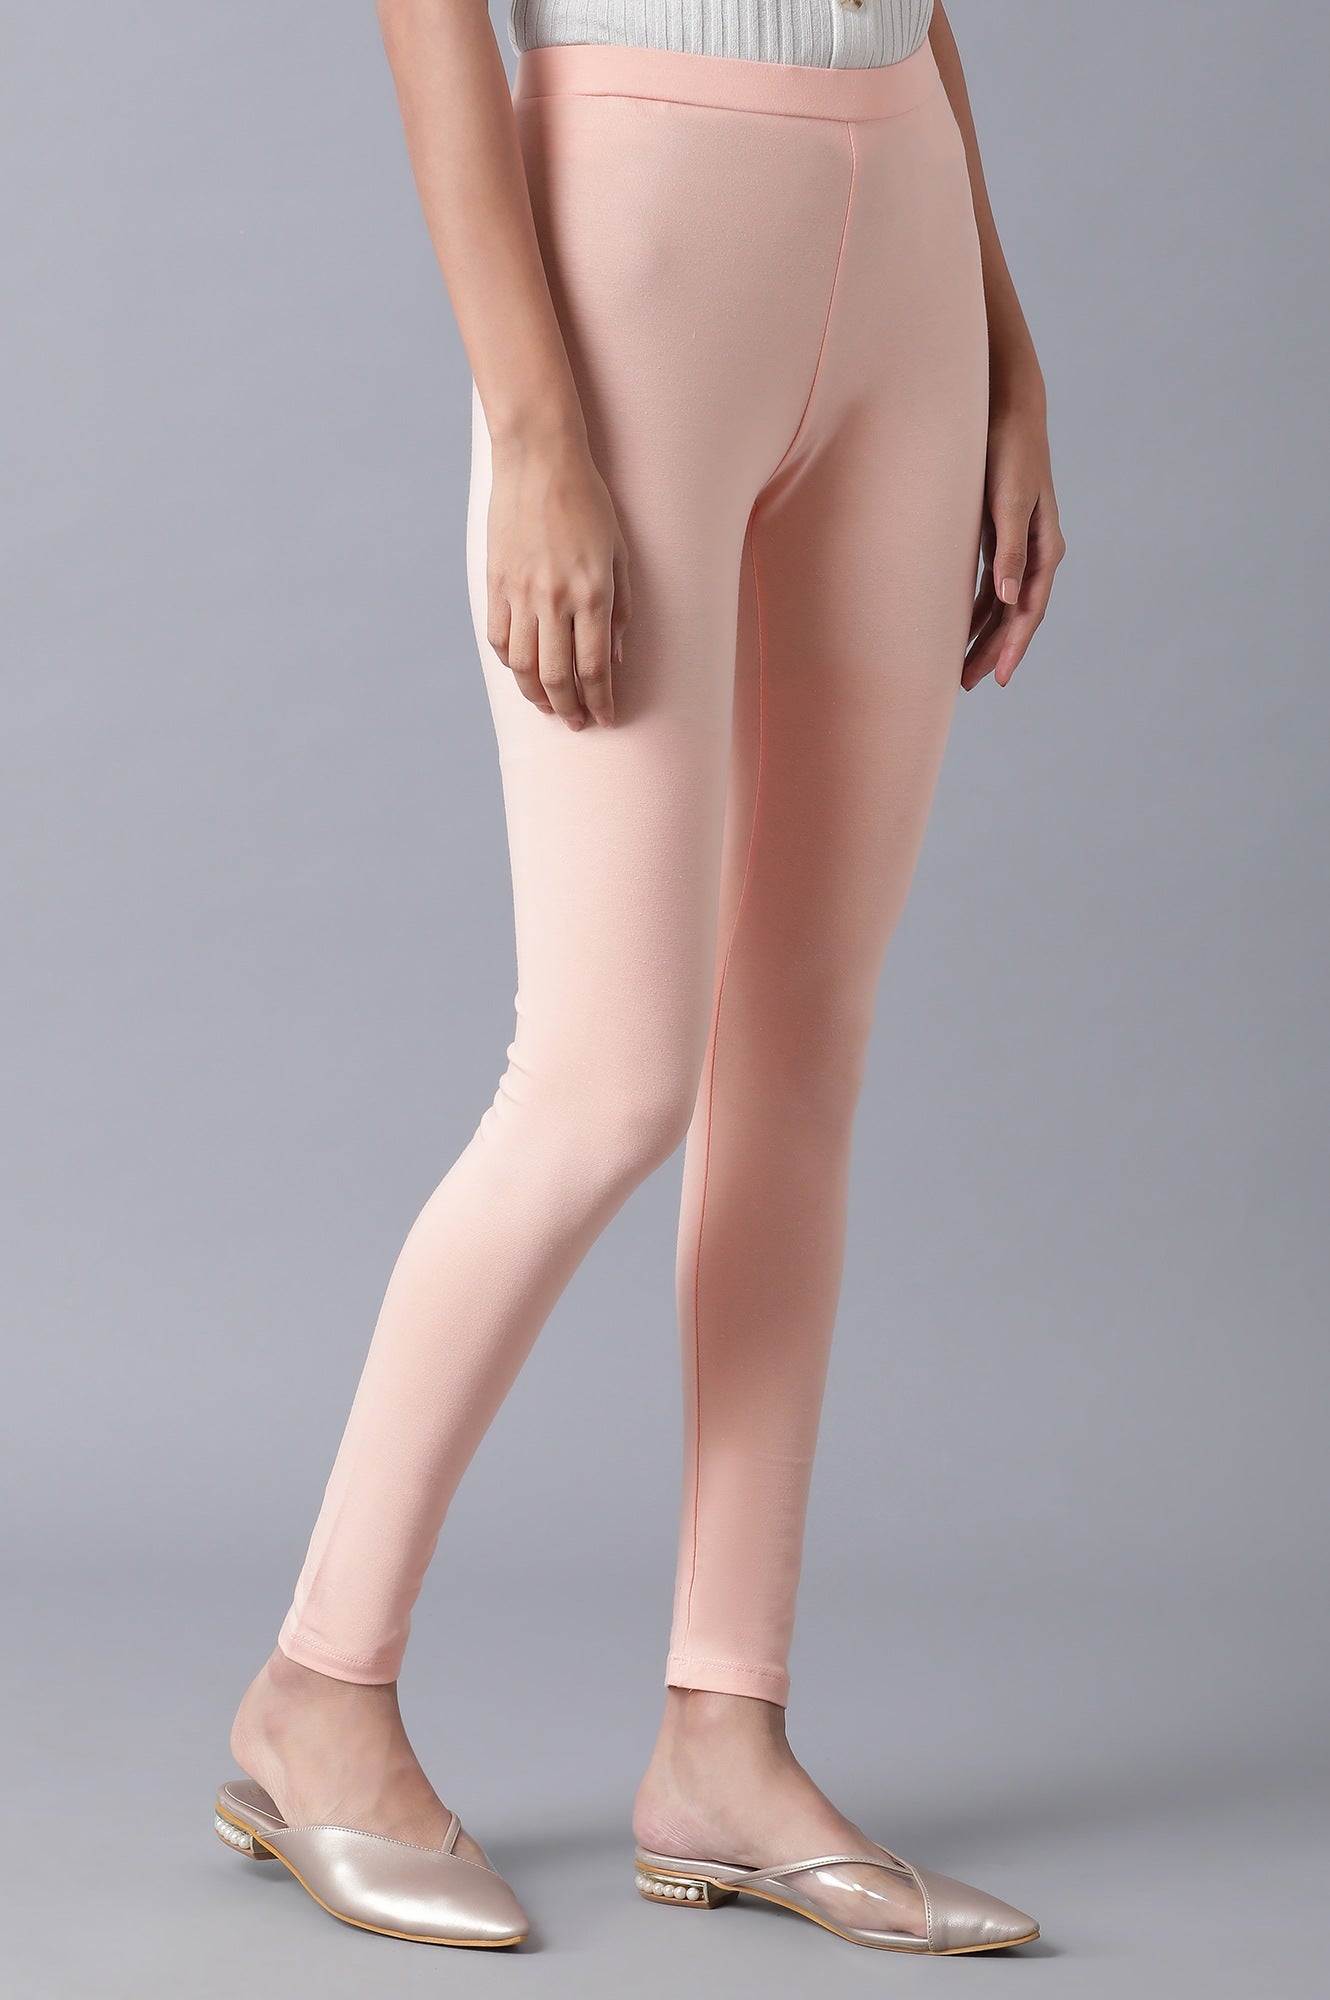 Blush Pink Solid Tights